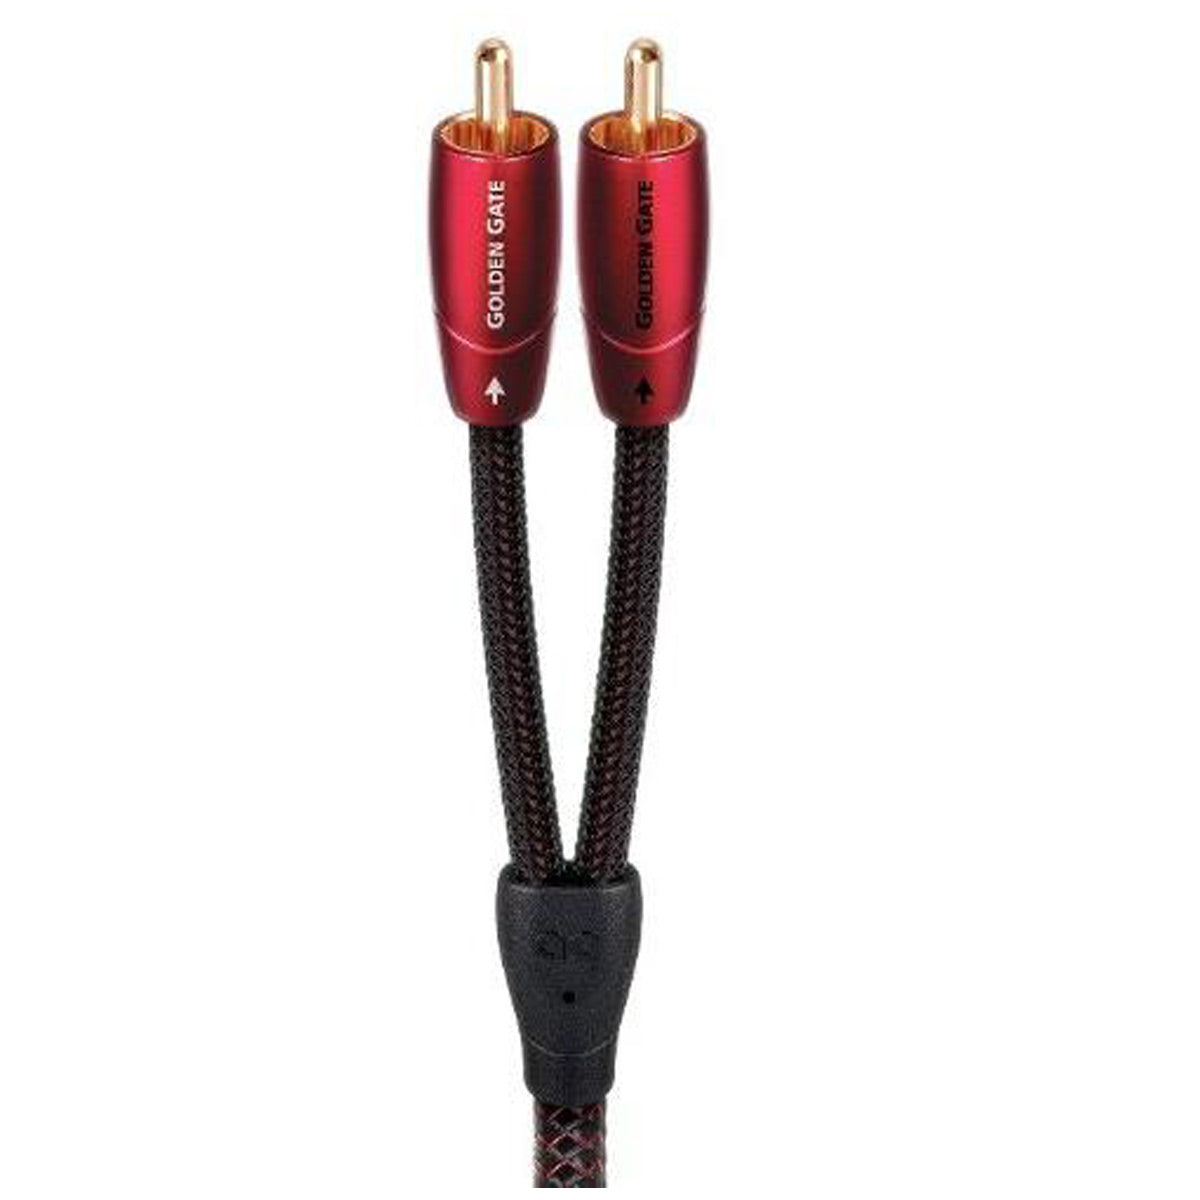 AudioQuest Golden Gate RCA Male to RCA Male Cable - 9.84 ft. (3m)